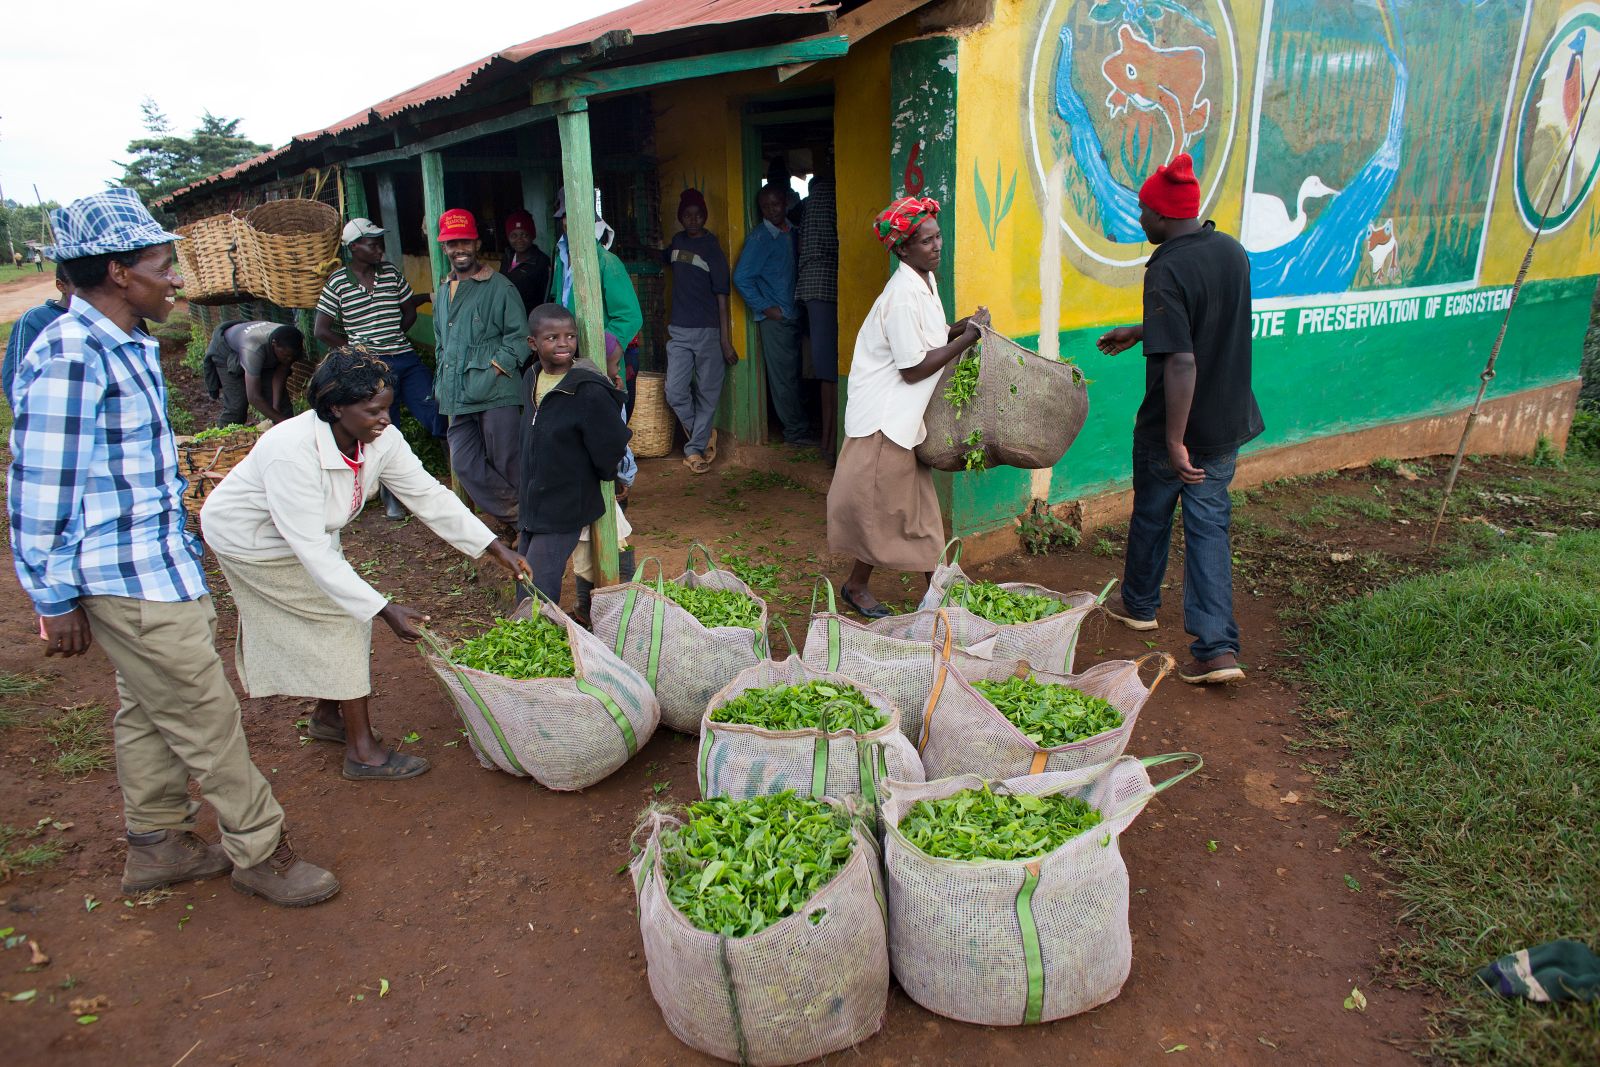 Fair wages and trade could decisively reduce poverty: tea production in Kenya.